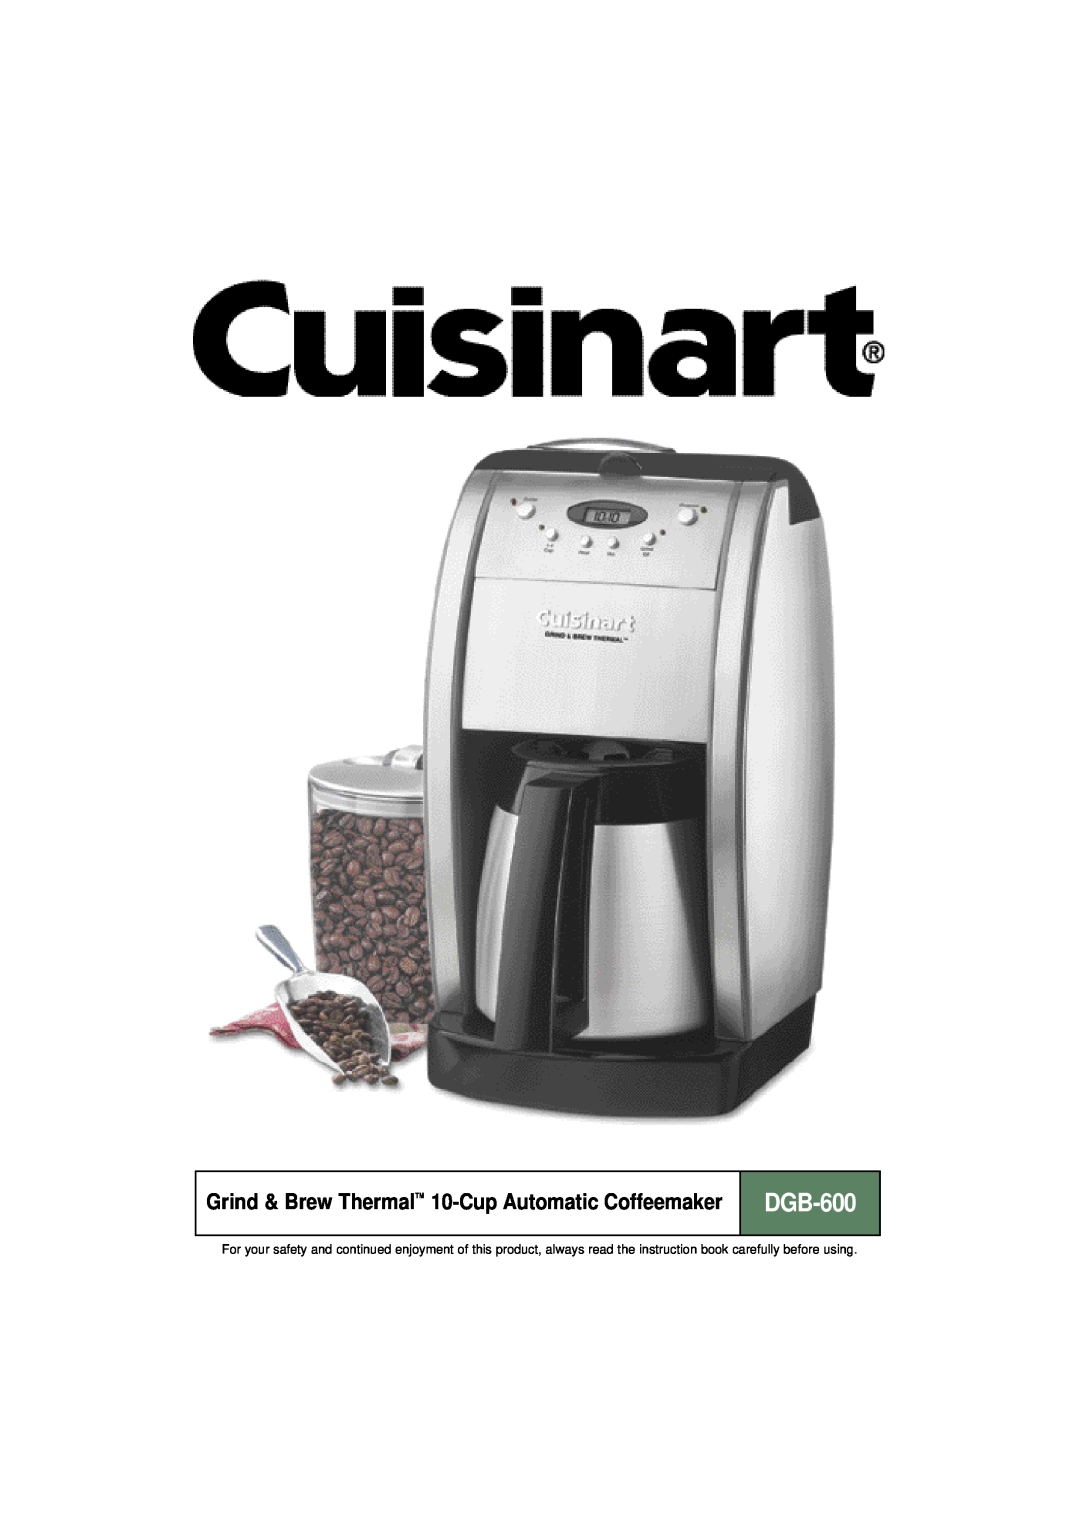 Cuisinart DGB-600BC manual Grind & Brew Thermal 10-Cup Automatic Coffeemaker DGB-600 